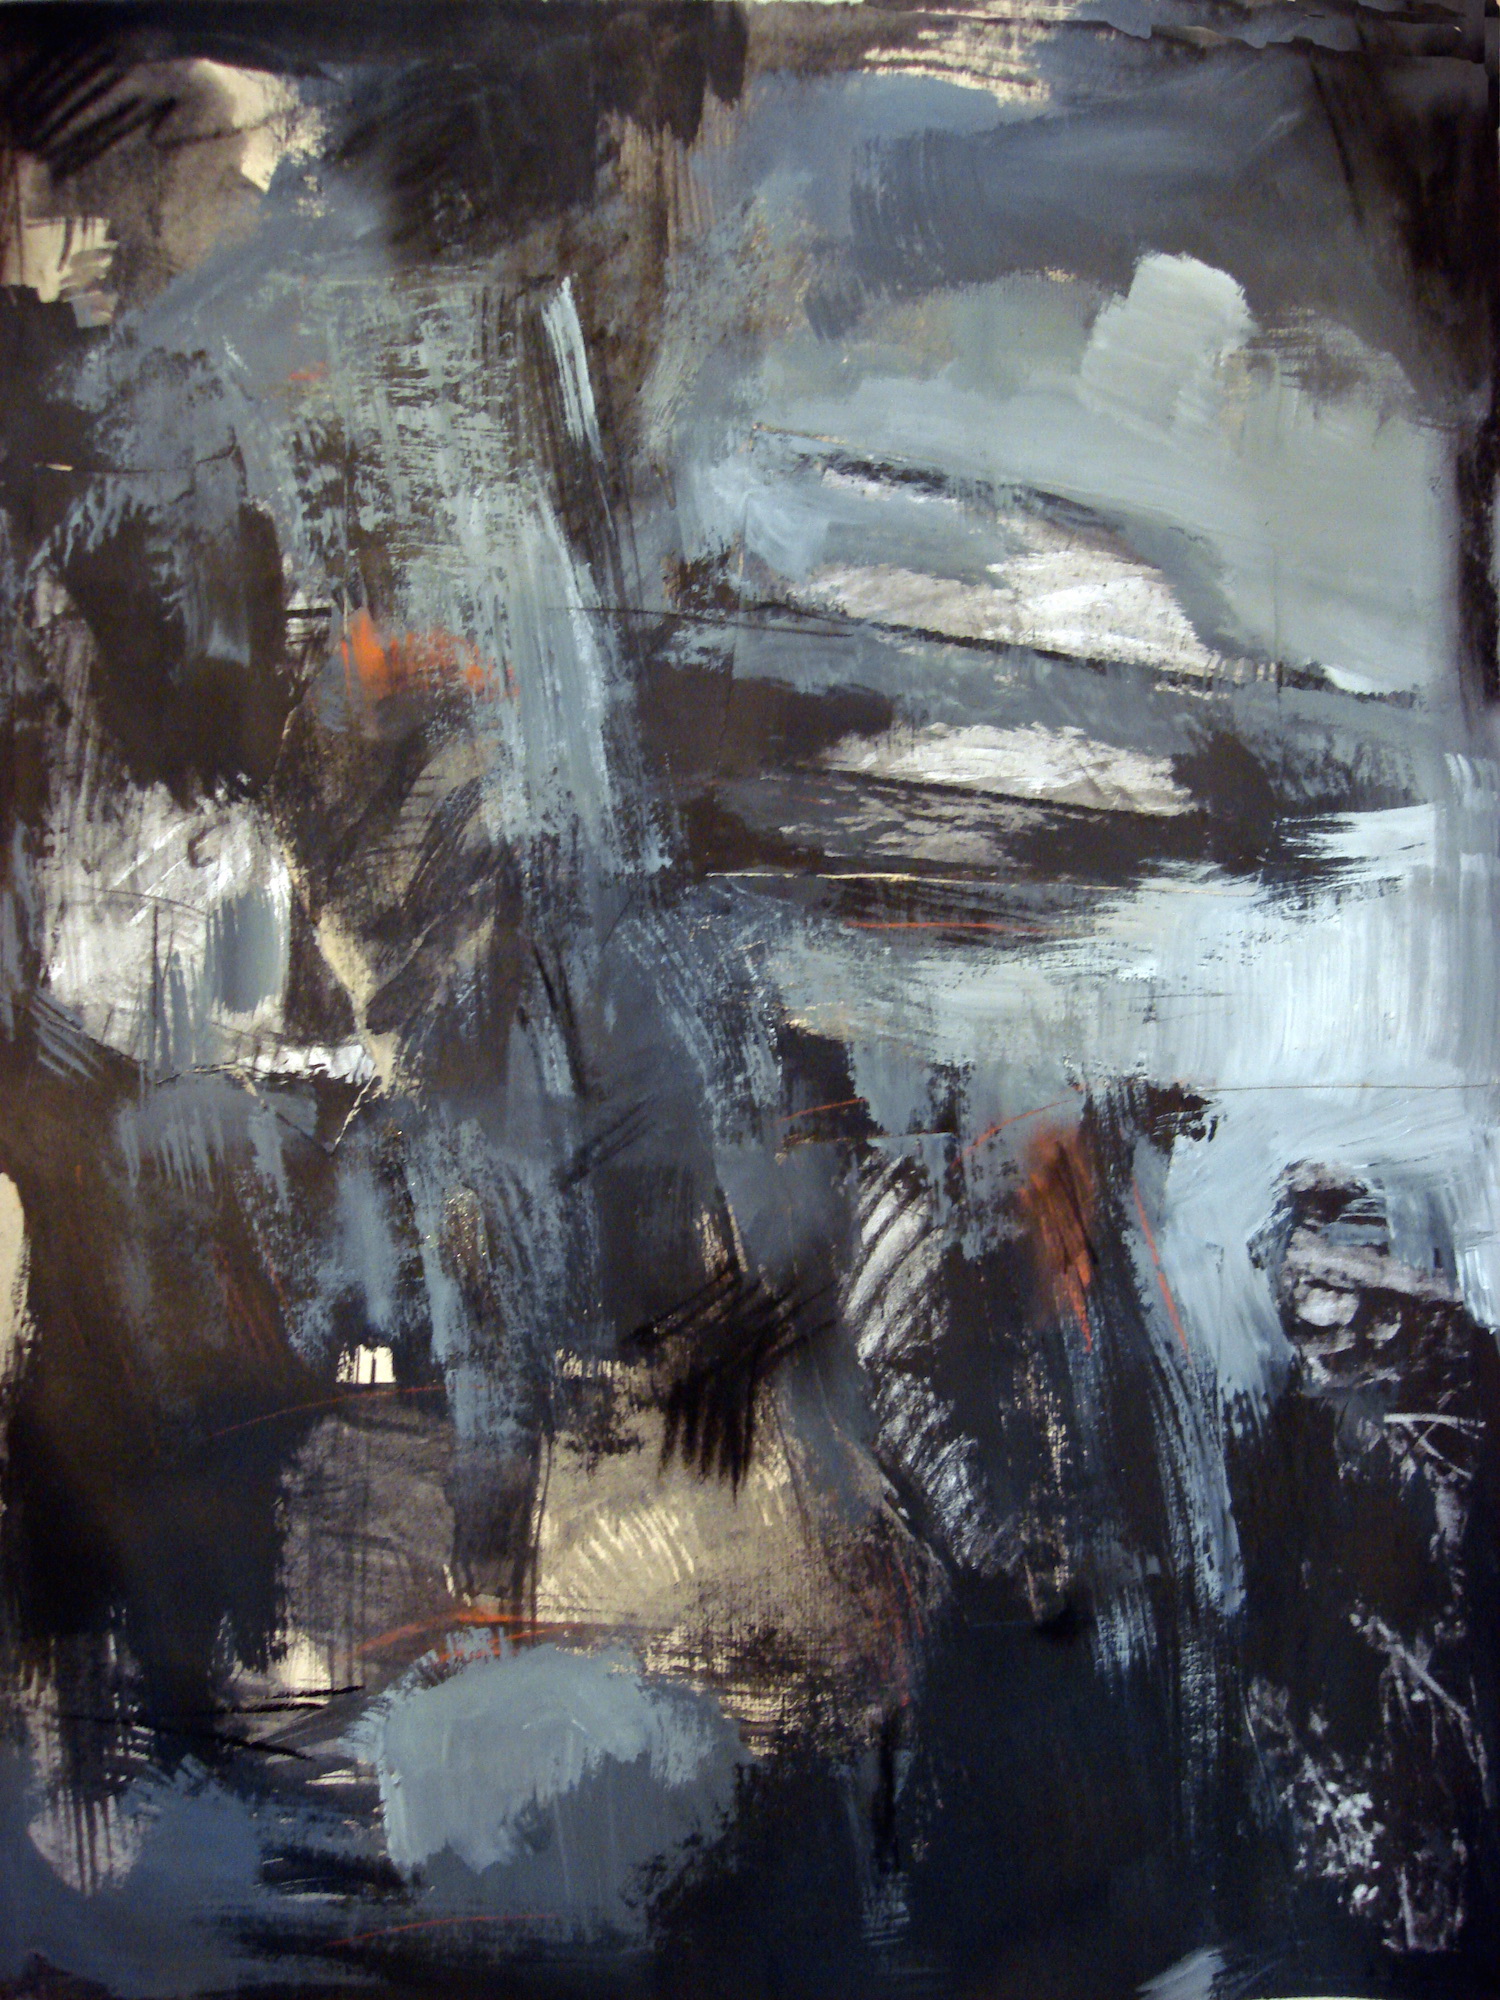 Untitled #12, acrylic and pastel on paper, 39x31 inches, 2009